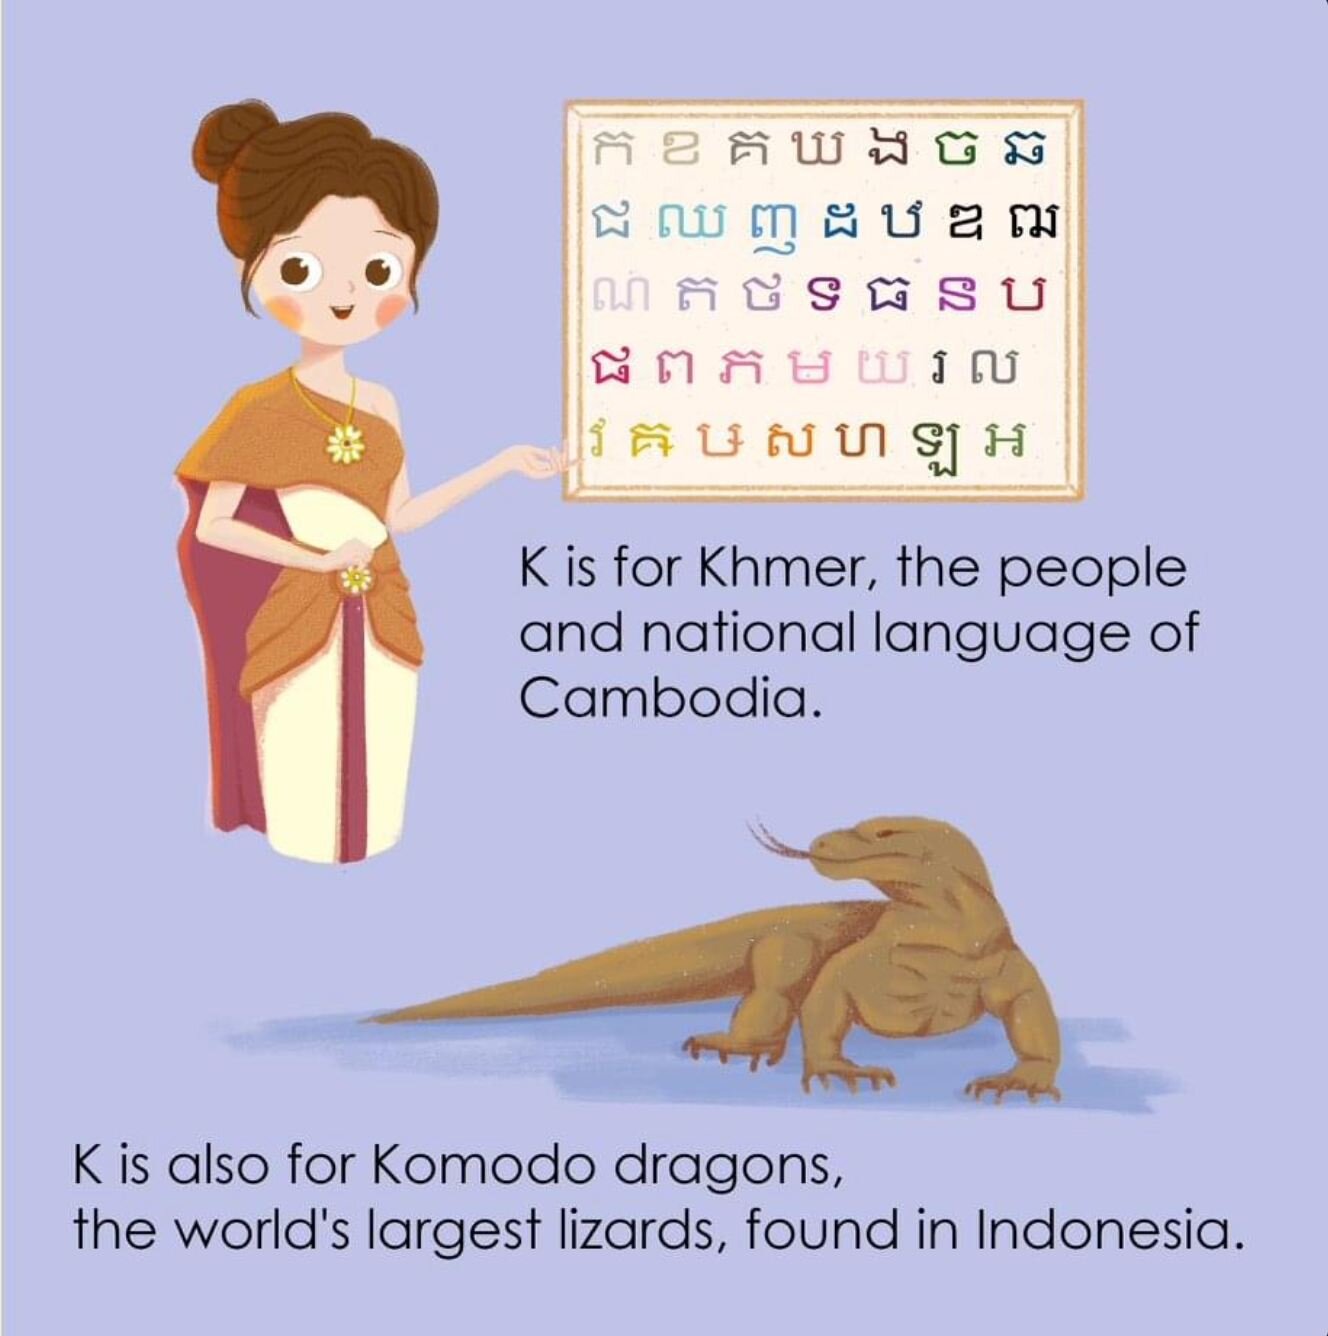 Let's dive deeper into the letter K! Did you know that K is not only the symbol for Kuala Lumpur but also represents some amazing things in Southeast Asia? K is also the initial for Khmer, the people and national language of Cambodia, and Komodo Drag